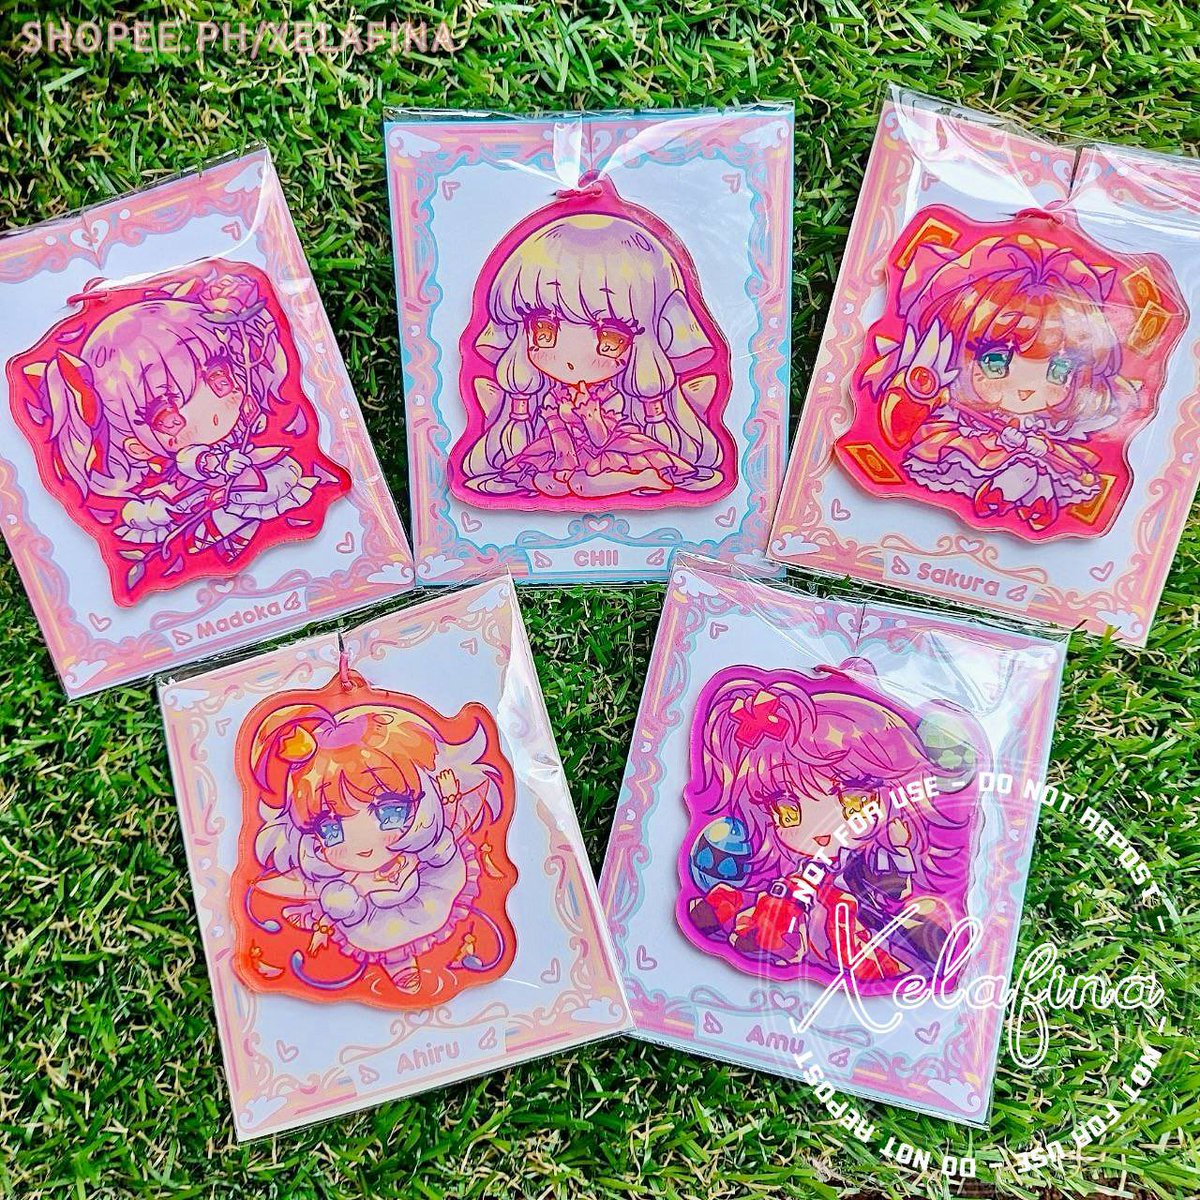 🌷 Xela K◇fi Sh◇p Raffle🌷

International st◇re opening RAFFLE!! 
Charms, prints, stickers + more!

🌸St◇re: https://t.co/V8iedLRlEL

🌱To Enter🌱
- RT✨ to win any merch of ur choice worth $30 + FREE SHIPPING
- Account must be public
- Optional: tag a friend

🌸Ends Feb 16th 